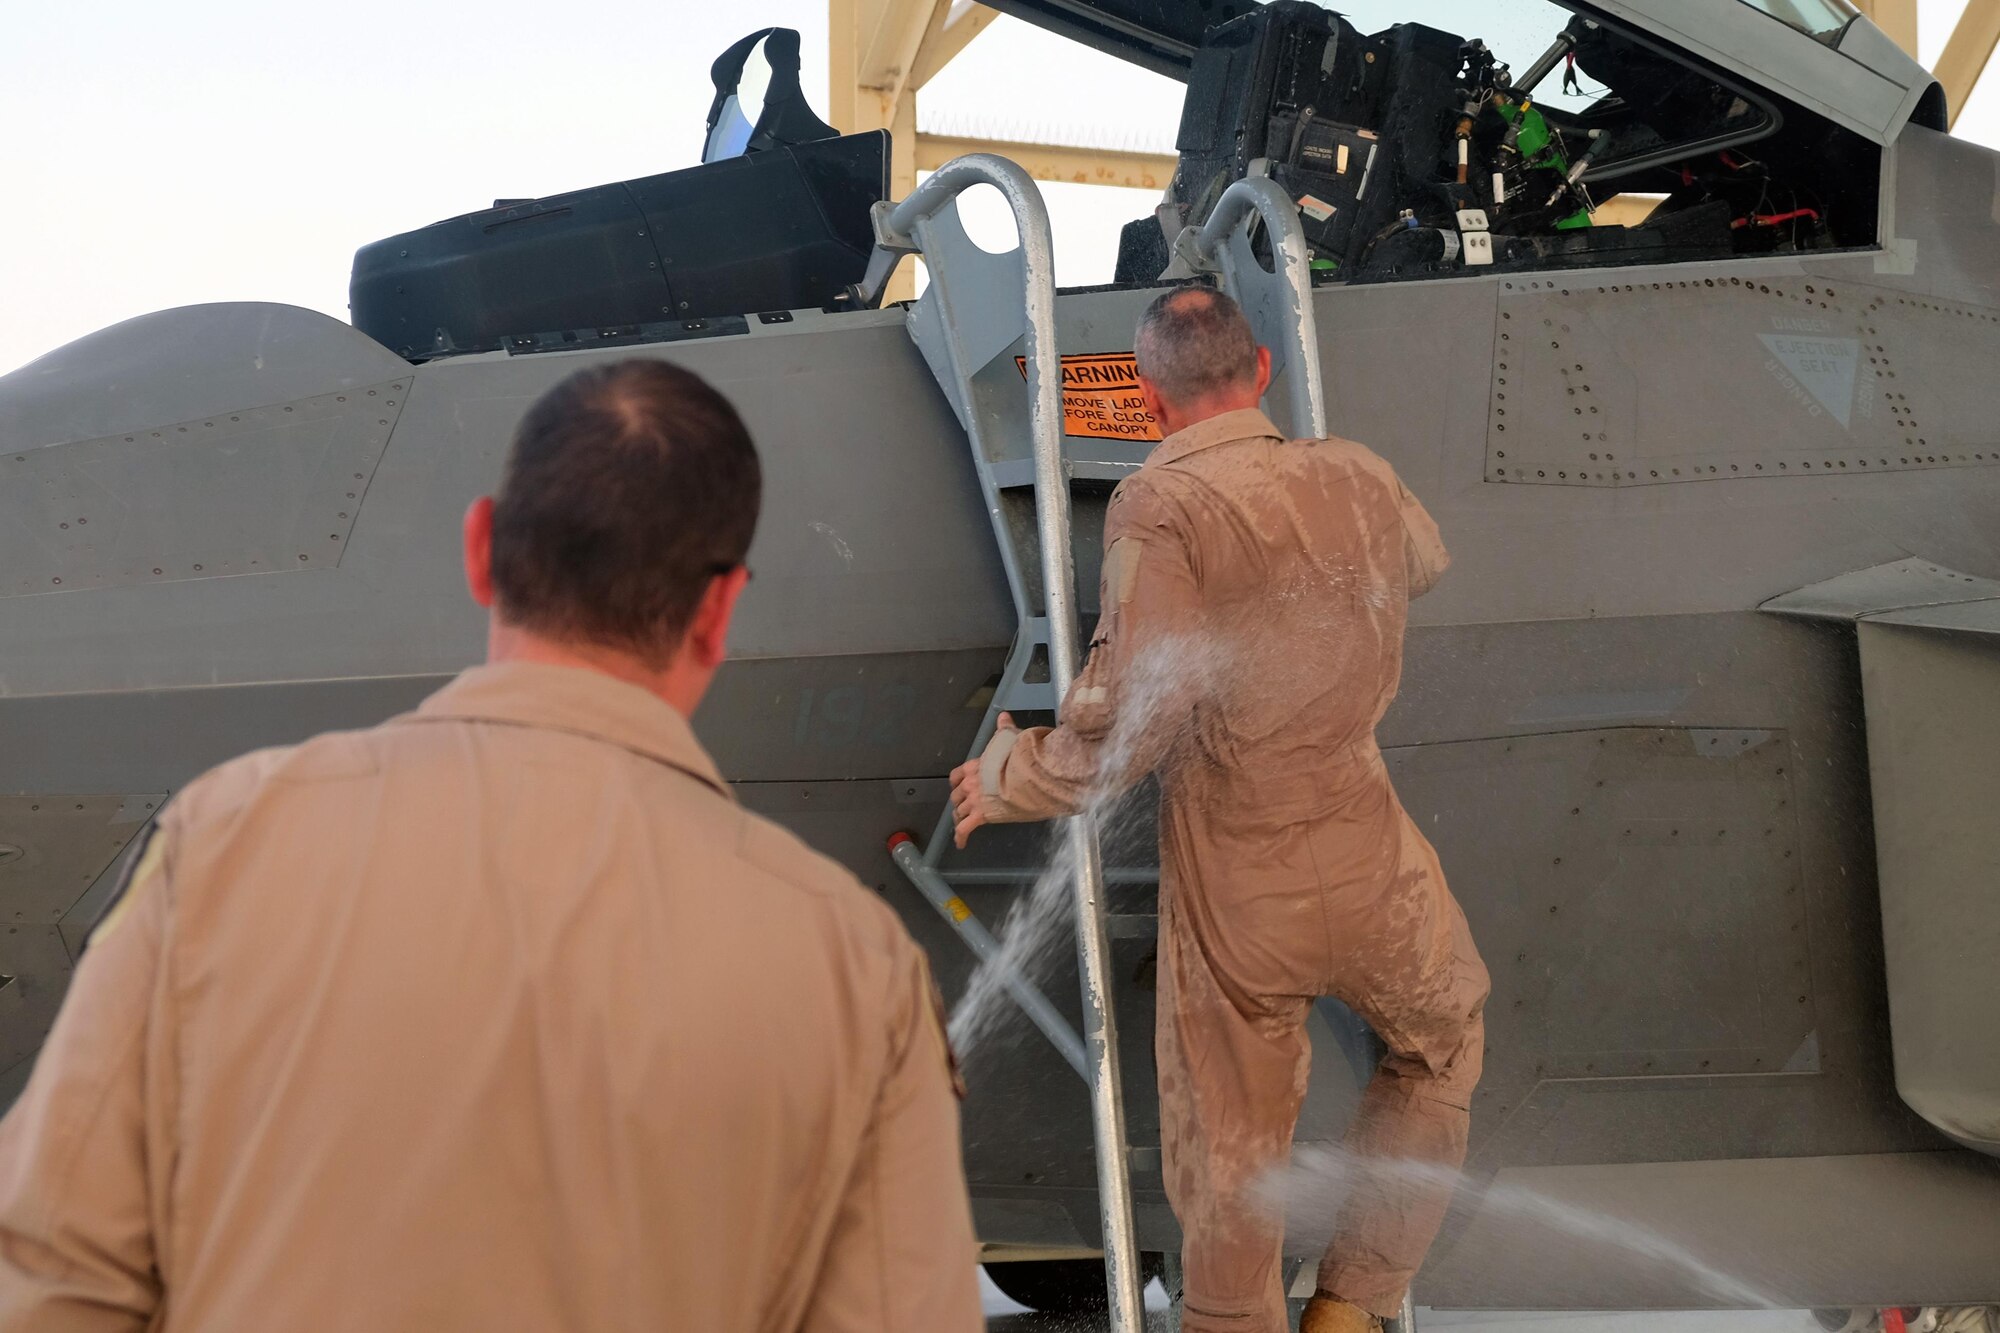 Brig. Gen. Charles S. Corcoran, 380th Air Expeditionary Wing commander, climbs down from an F-22 Raptor while being sprayed with water at his fini-flight June 30, 2017, at an undisclosed location in southwest Asia. After his tenure as 380 AEW commander, Corcoran is slated to assume the position of Deputy Chief of Staff for NATO Air Operations at Allied Air Command Headquarters, Ramstein, Germany. (U.S. Air Force photo by Senior Airman Preston Webb)